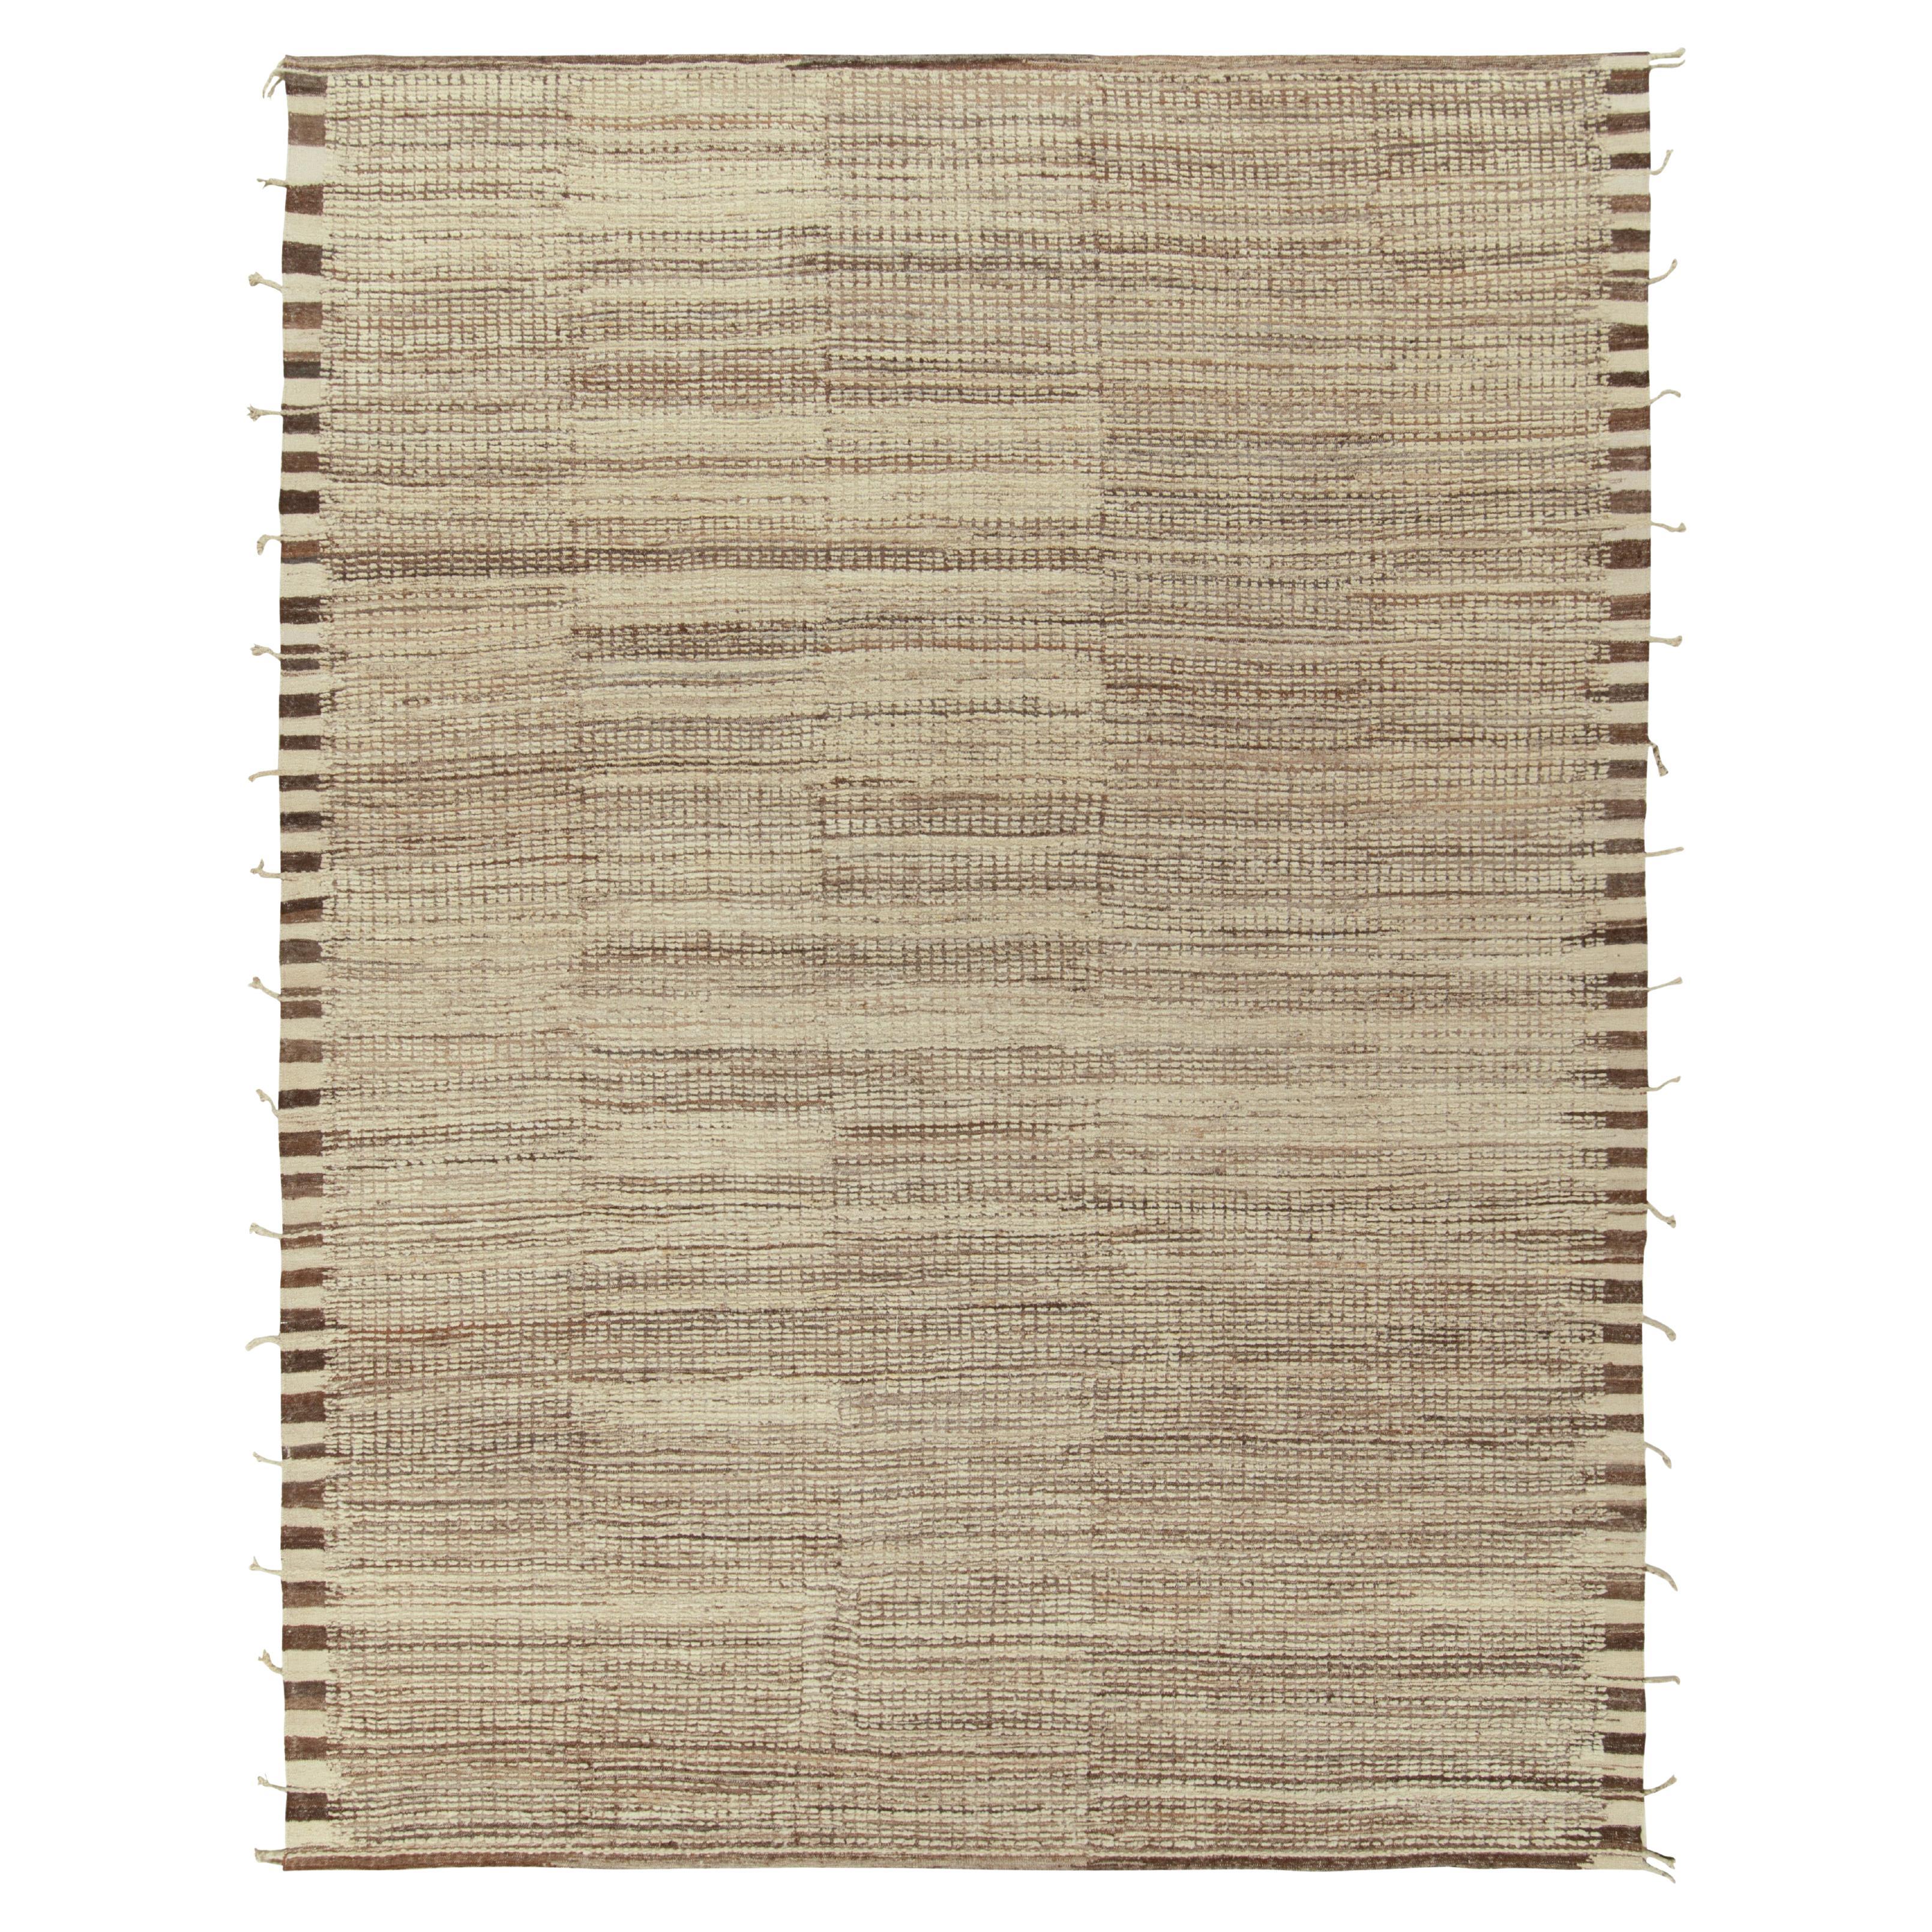 Rug & Kilim's Contemporary Moroccan Style Rug in Beige-Brown & White For Sale